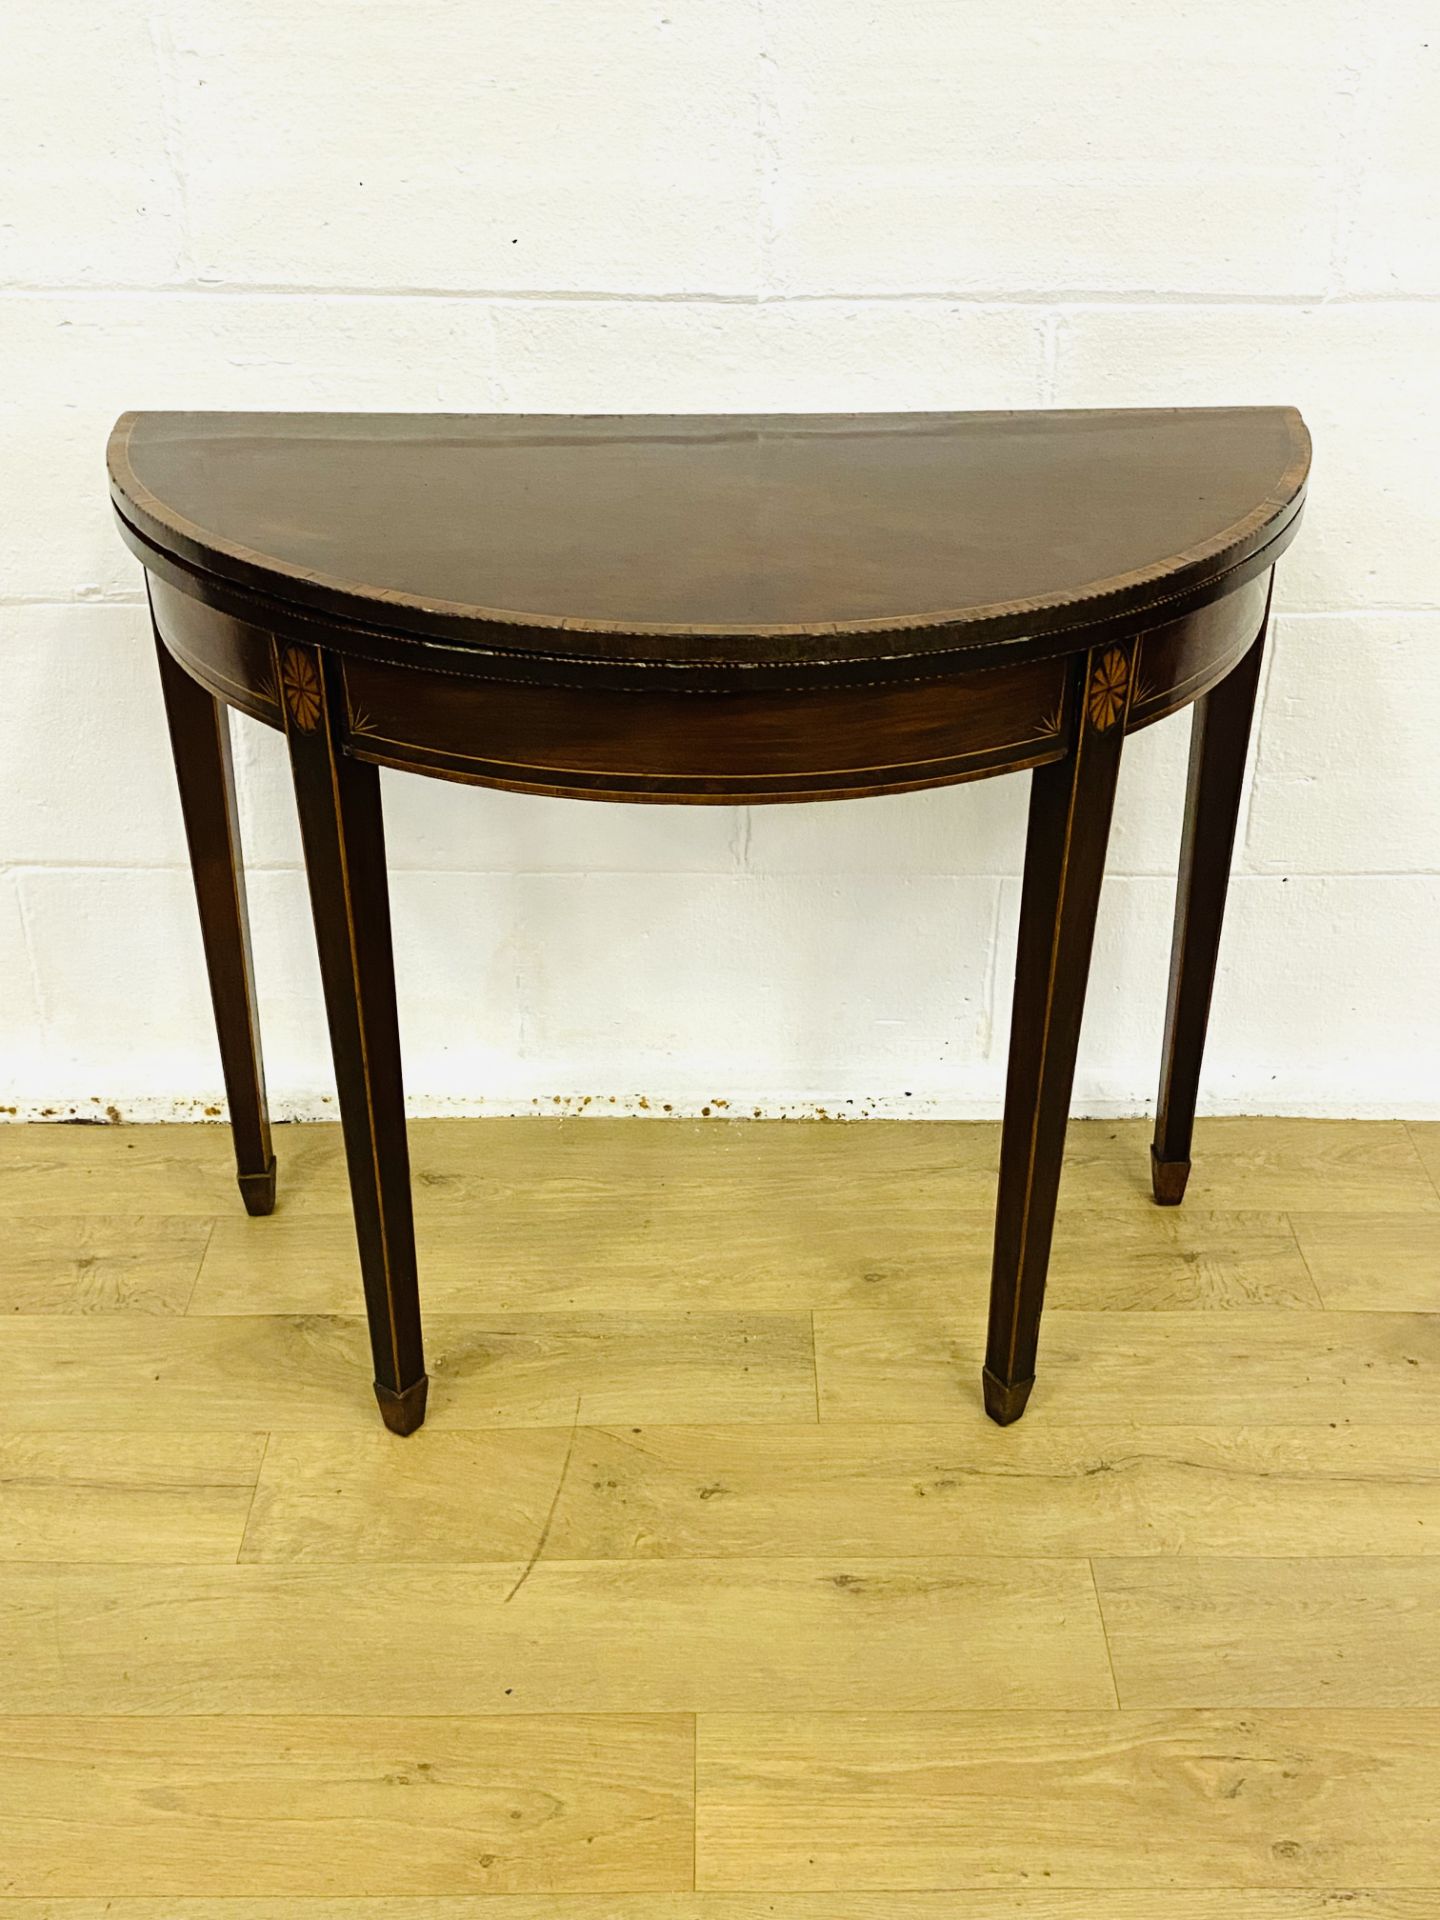 Demi lune fold top table - Image 3 of 5